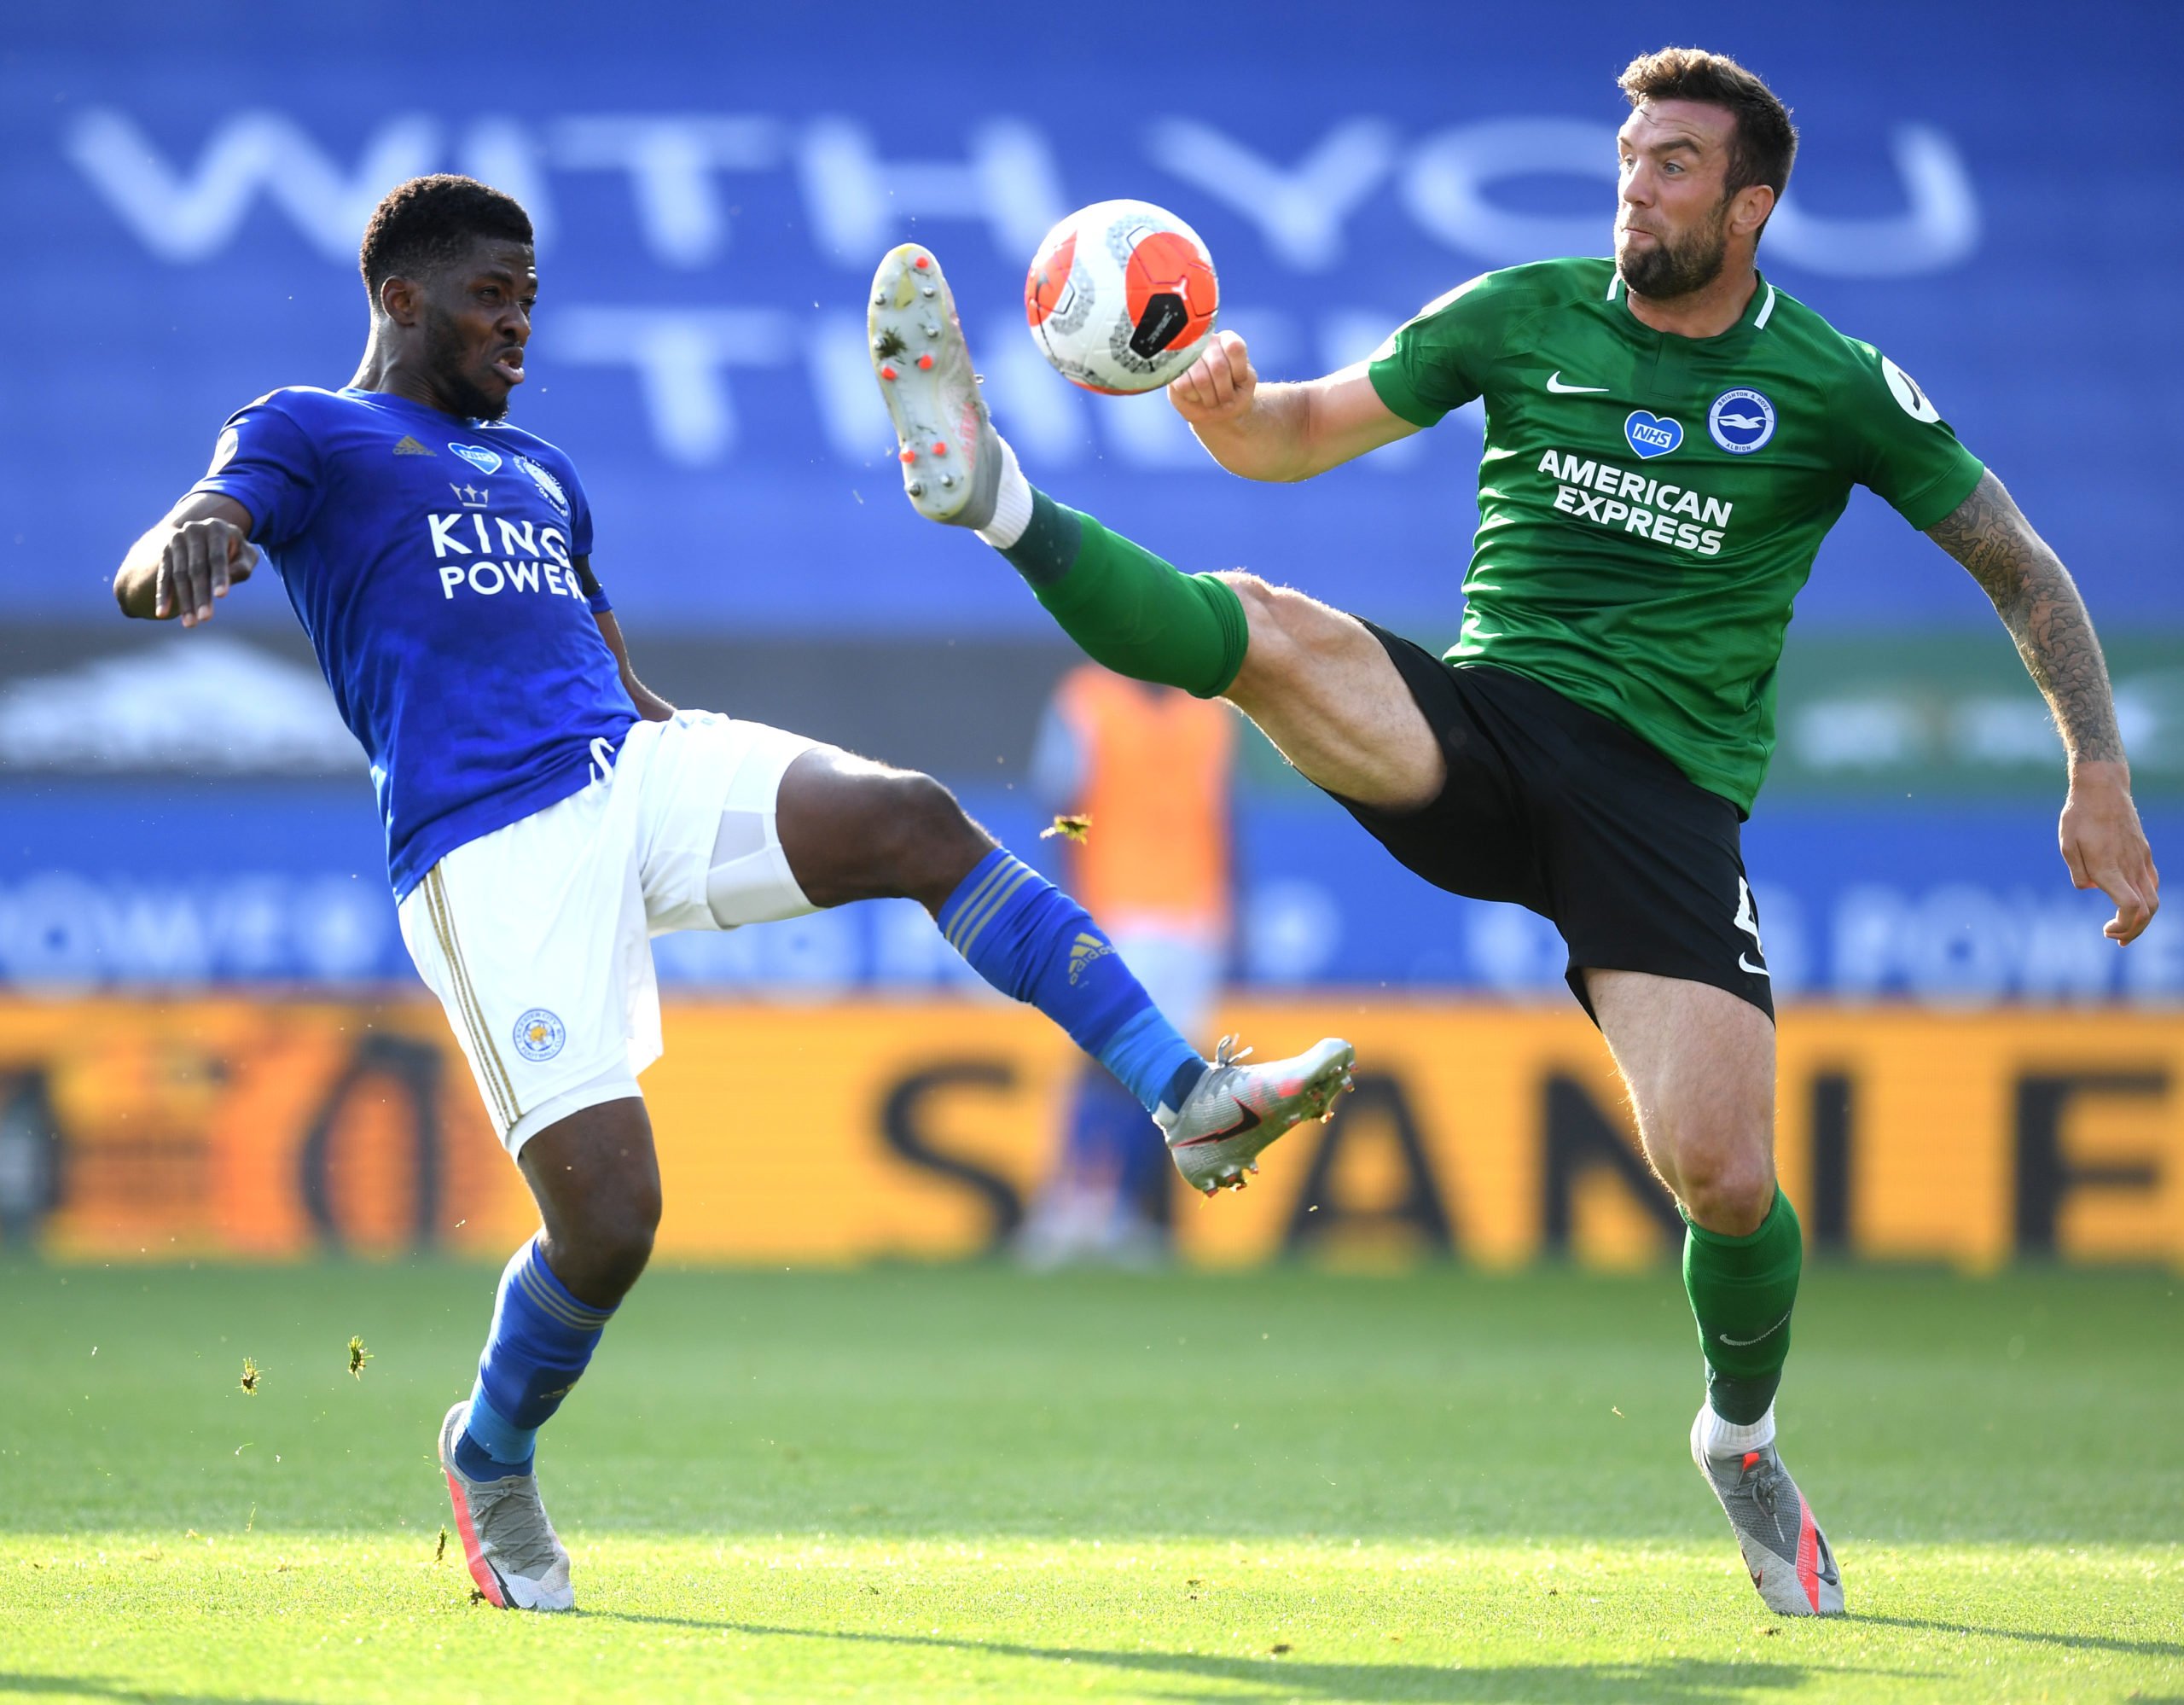 Shane Duffy in action vs Leicester City